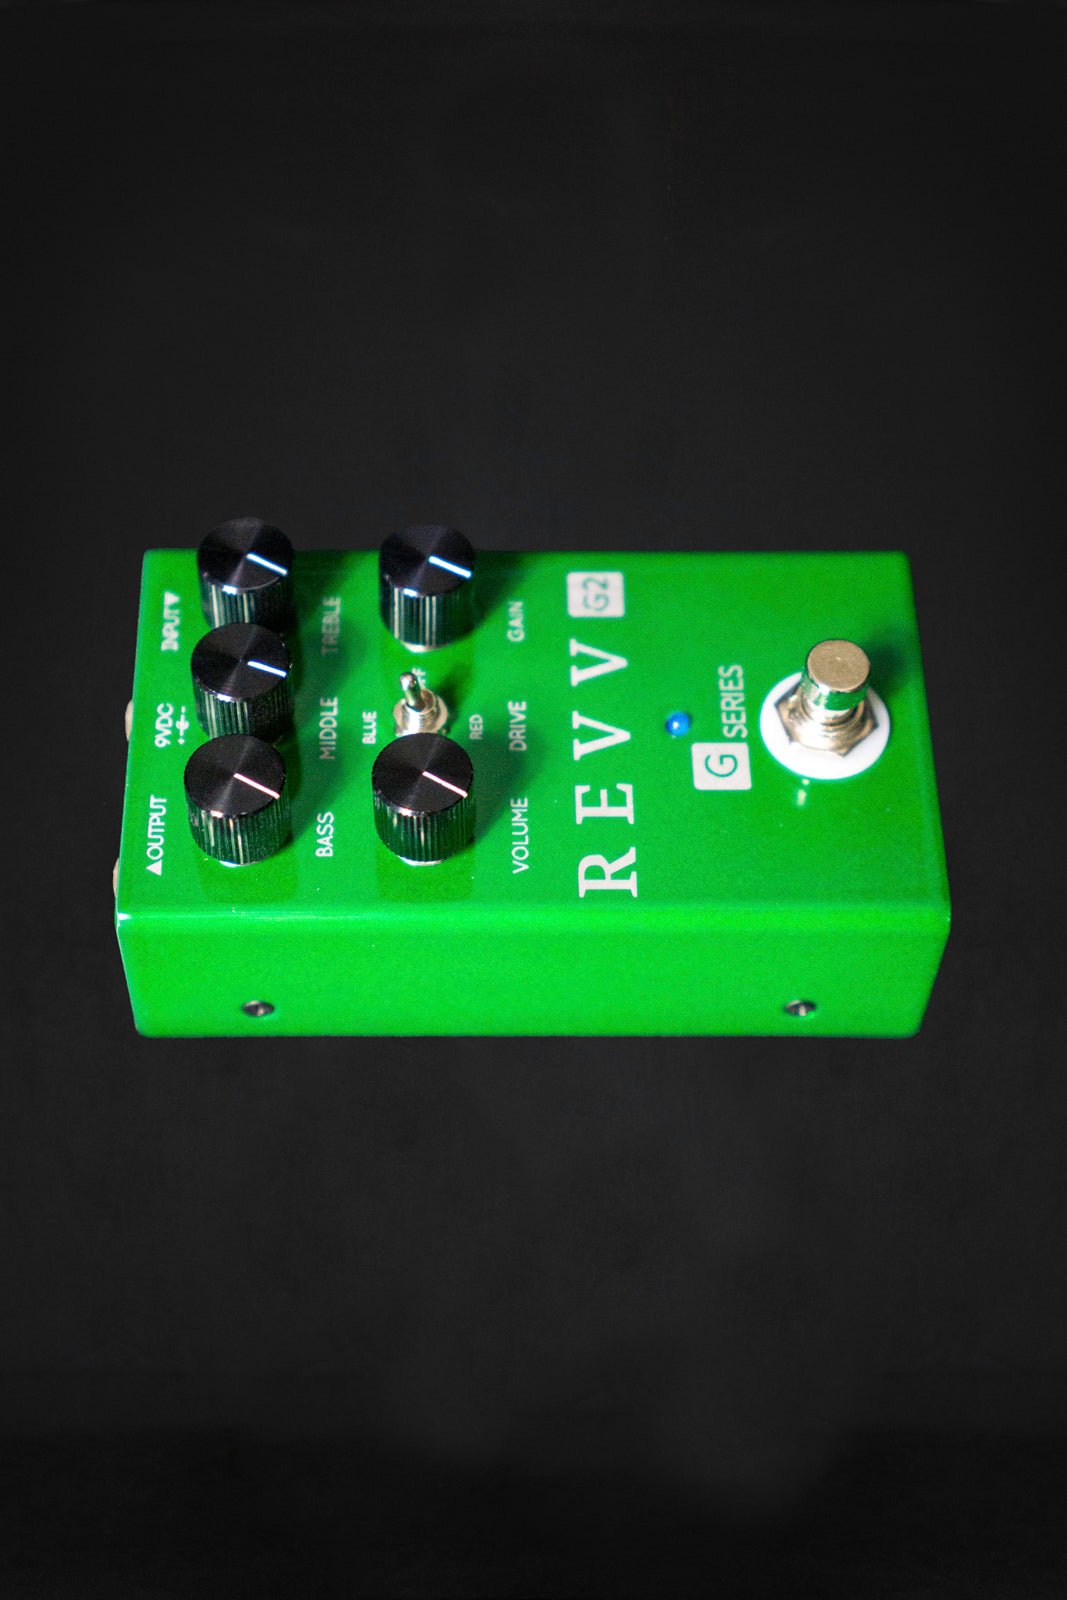 Revv G2 Dynamic Overdrive Pedal - Effects Pedals - REVV